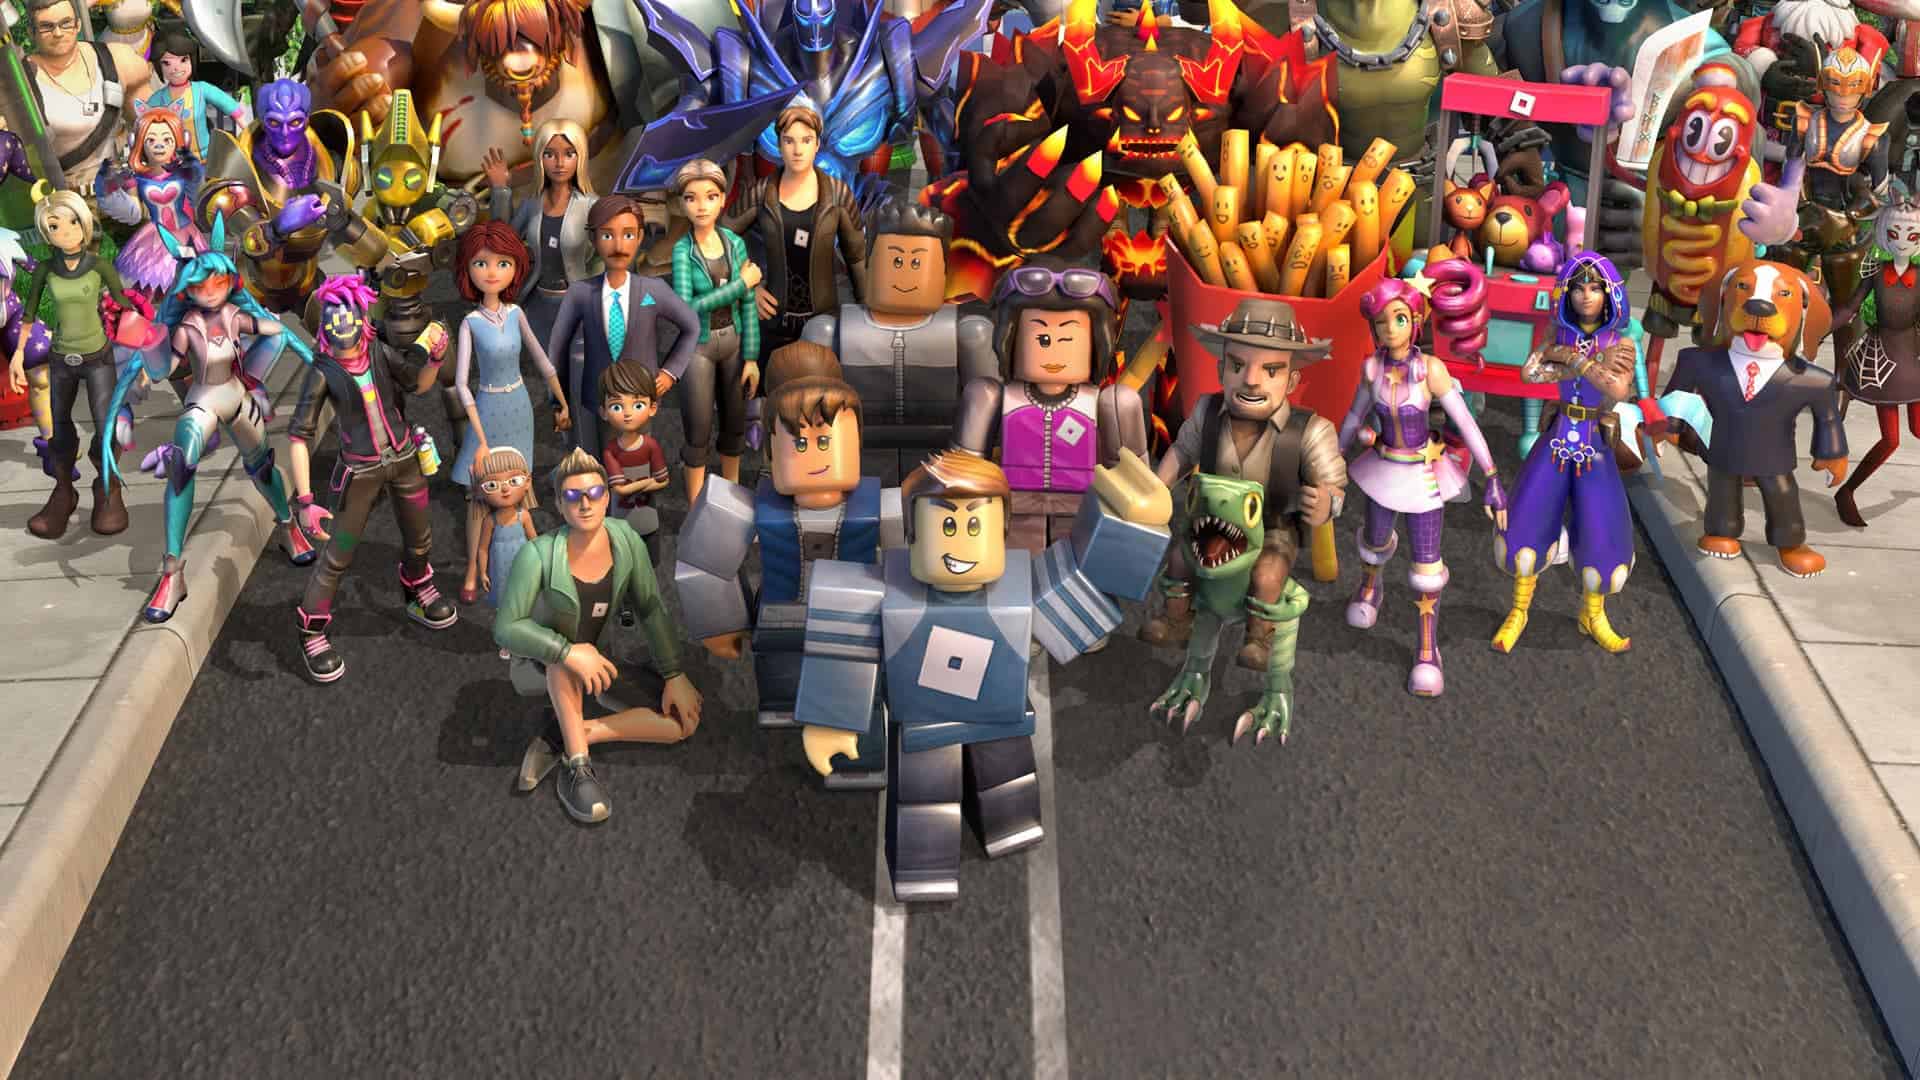 Connect with friends and explore virtual realms in Roblox games.